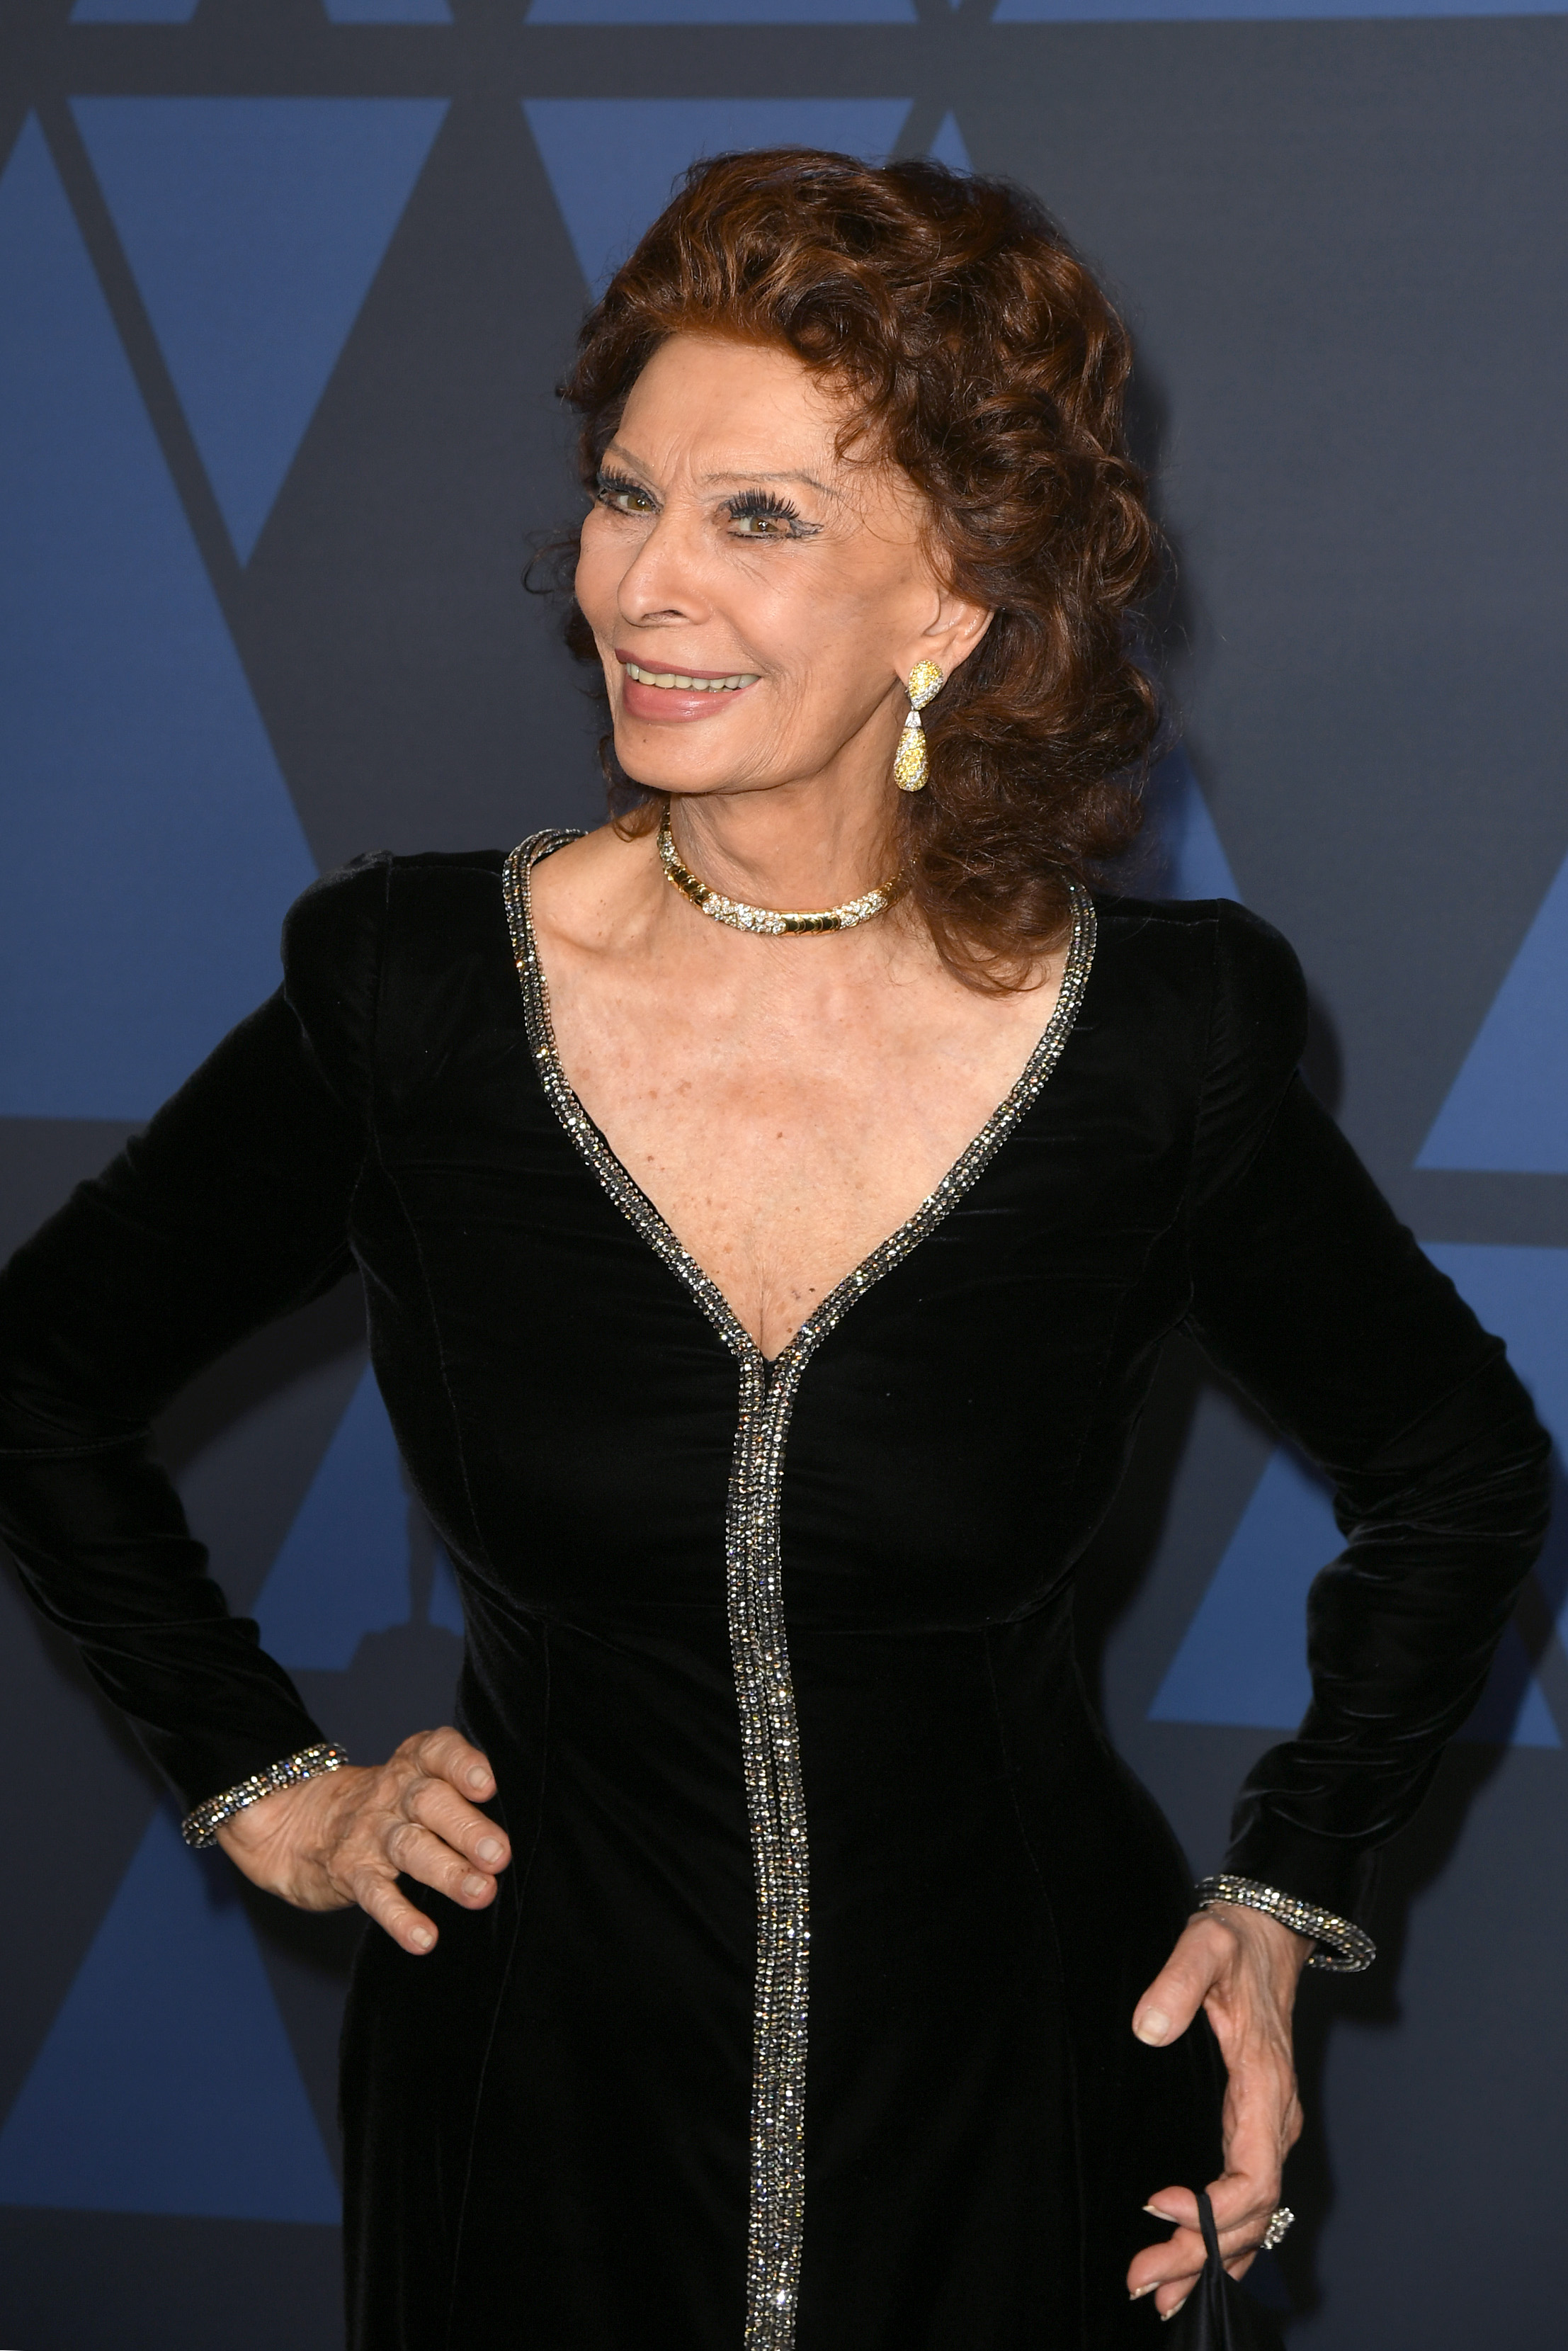 Sophia Loren attends the Academy Of Motion Picture Arts And Sciences' 11th Annual Governors Awards in Hollywood, California on October 27, 2019 | Source: Getty Images